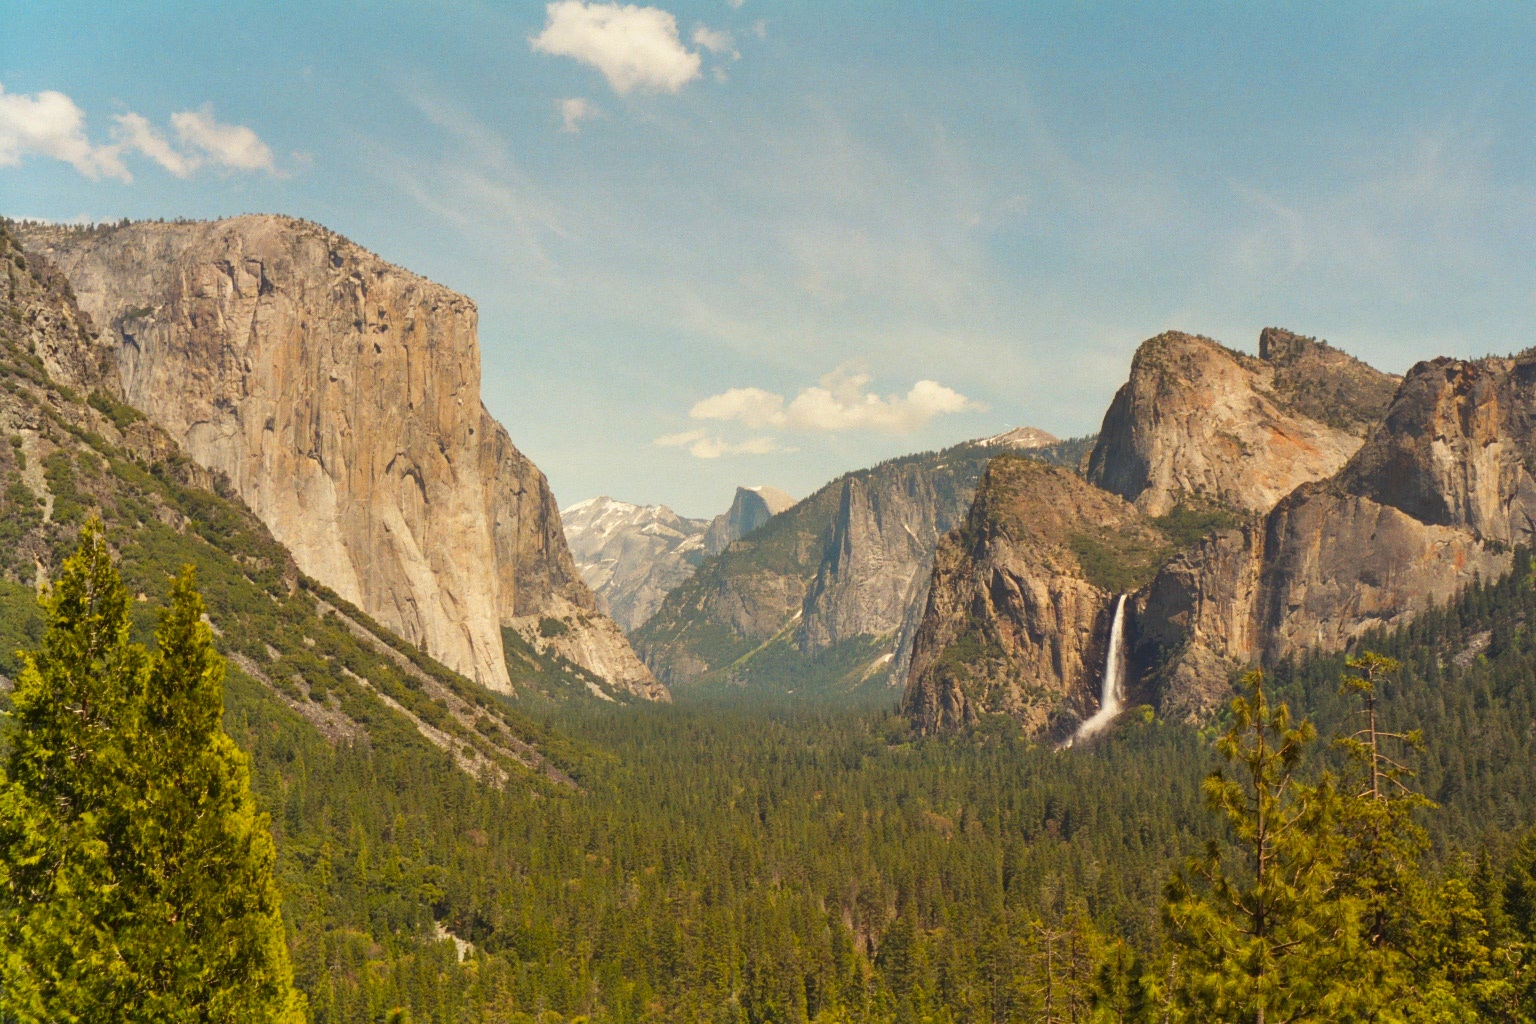 Tunnel View at Yosemite Valley, showing El Capitan, Bridalveil Fall, and Half Dome in the background.